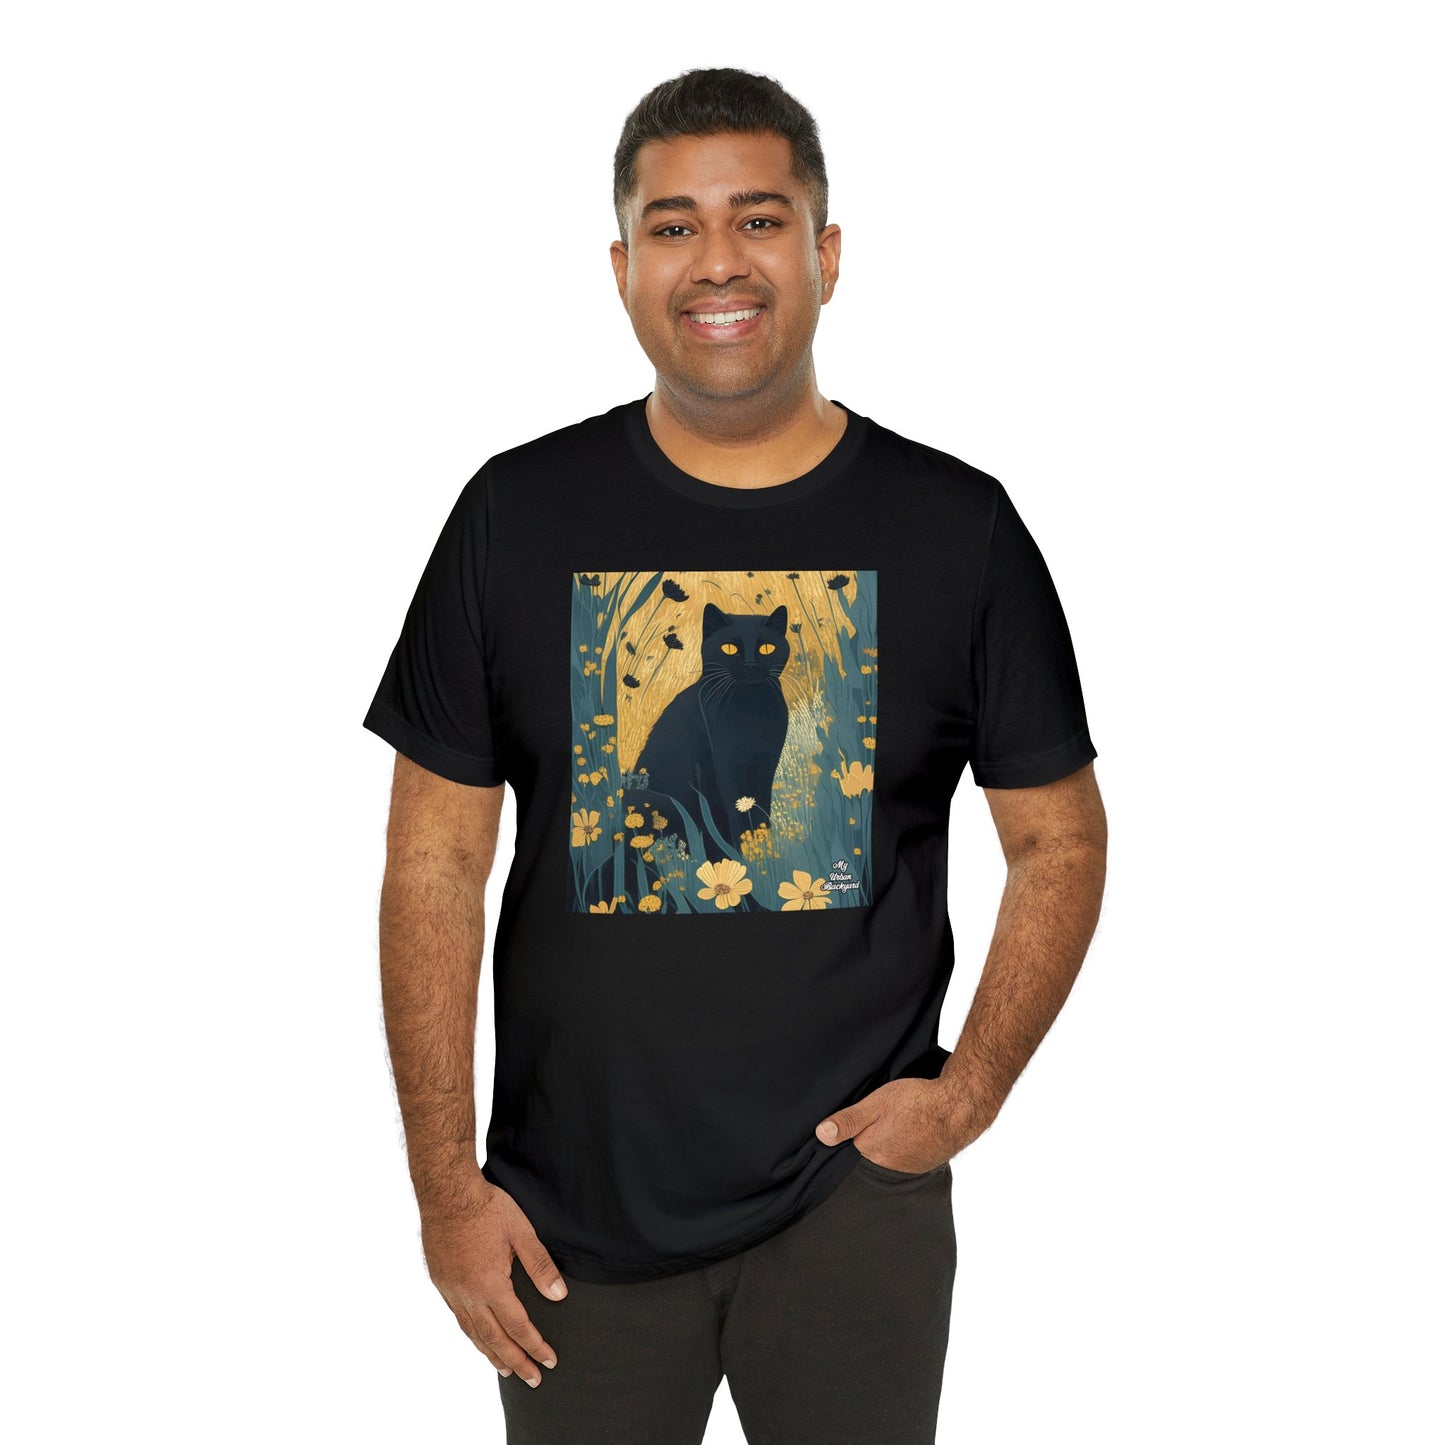 Black Cat and Wildflowers, Soft 100% Jersey Cotton T-Shirt, Unisex, Short Sleeve, Retail Fit